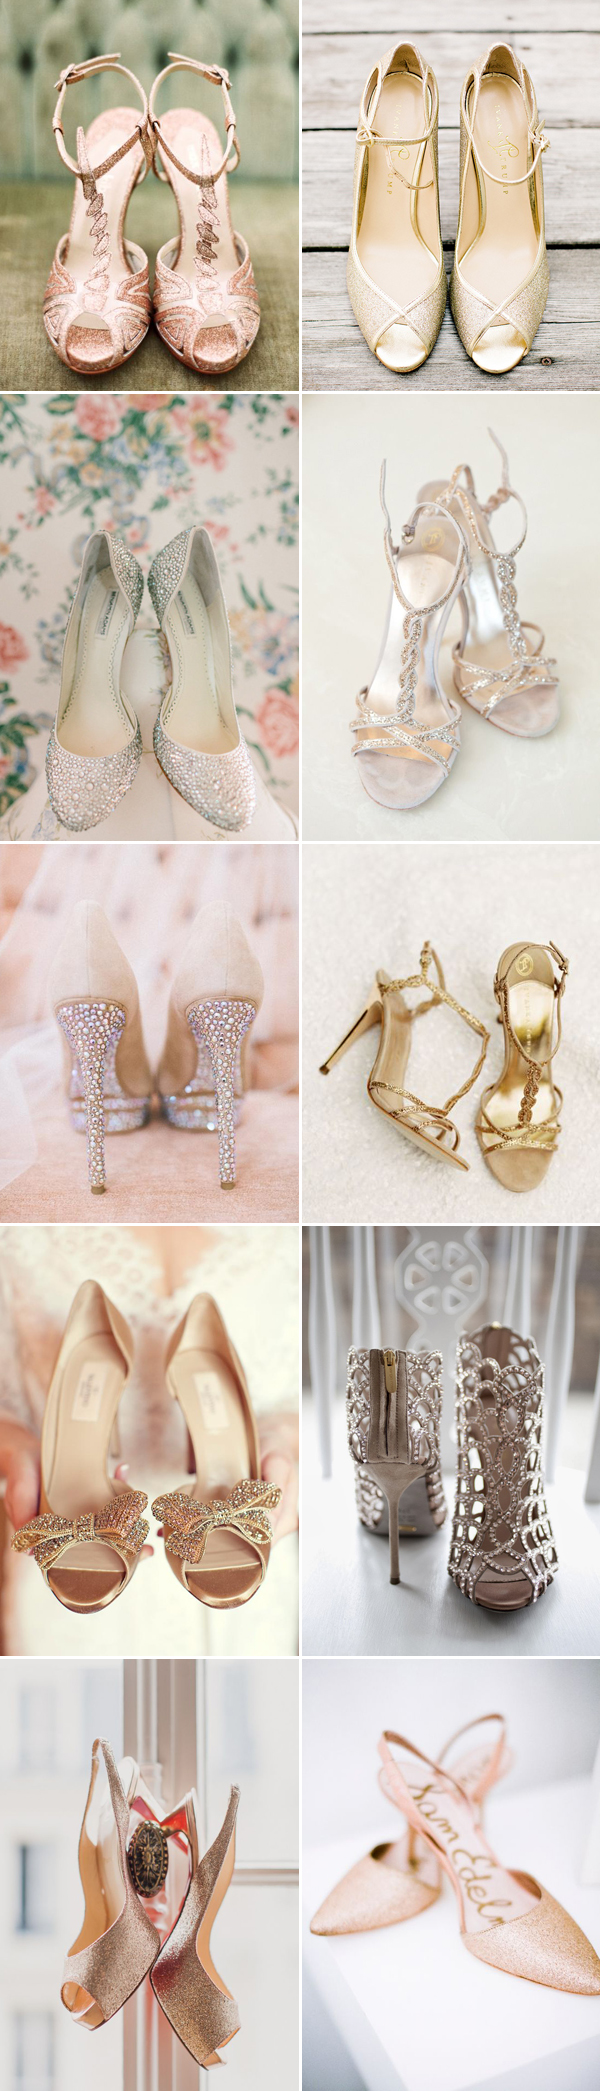 Weddings Gifts & Mementos Bridesmaids Gifts Luxury Wedge Heel Sparkling Crystal Stone and Sparkling Pearl Sparkling Wedge Heel Bridal shoes Gorgeous bridal shoes with comfortable 